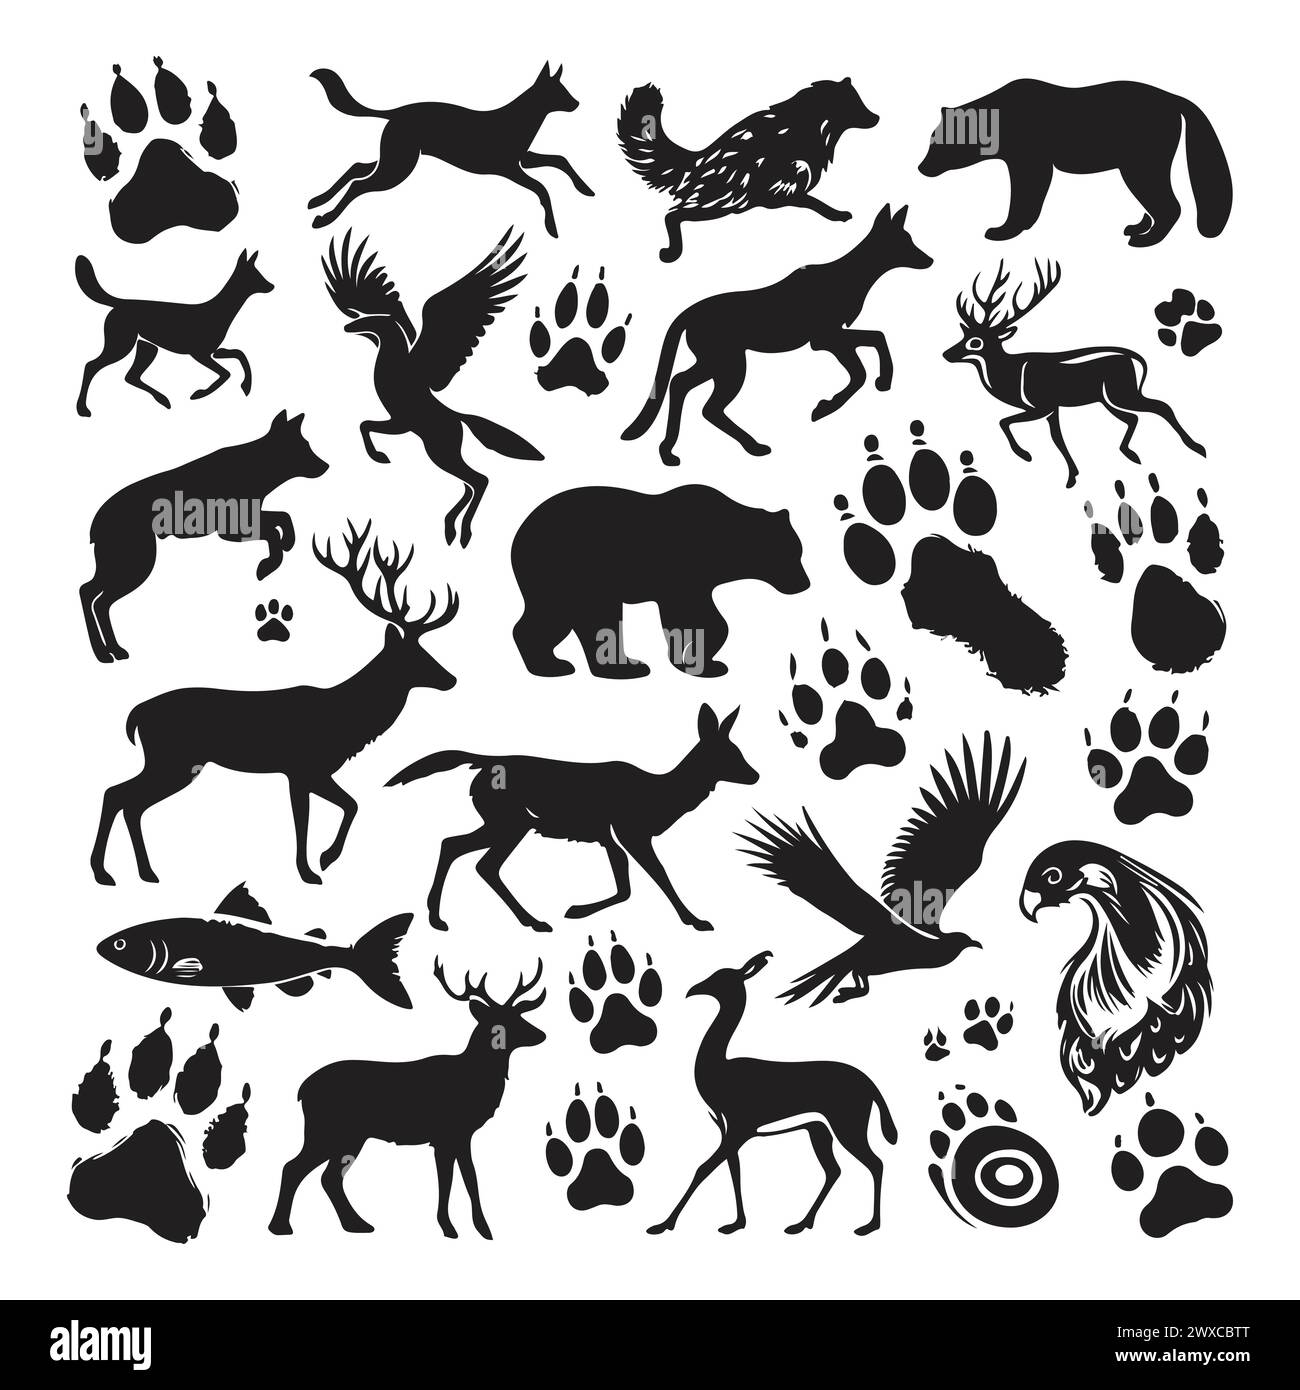 Silhouette set of different animals and their footprint Stock Vector